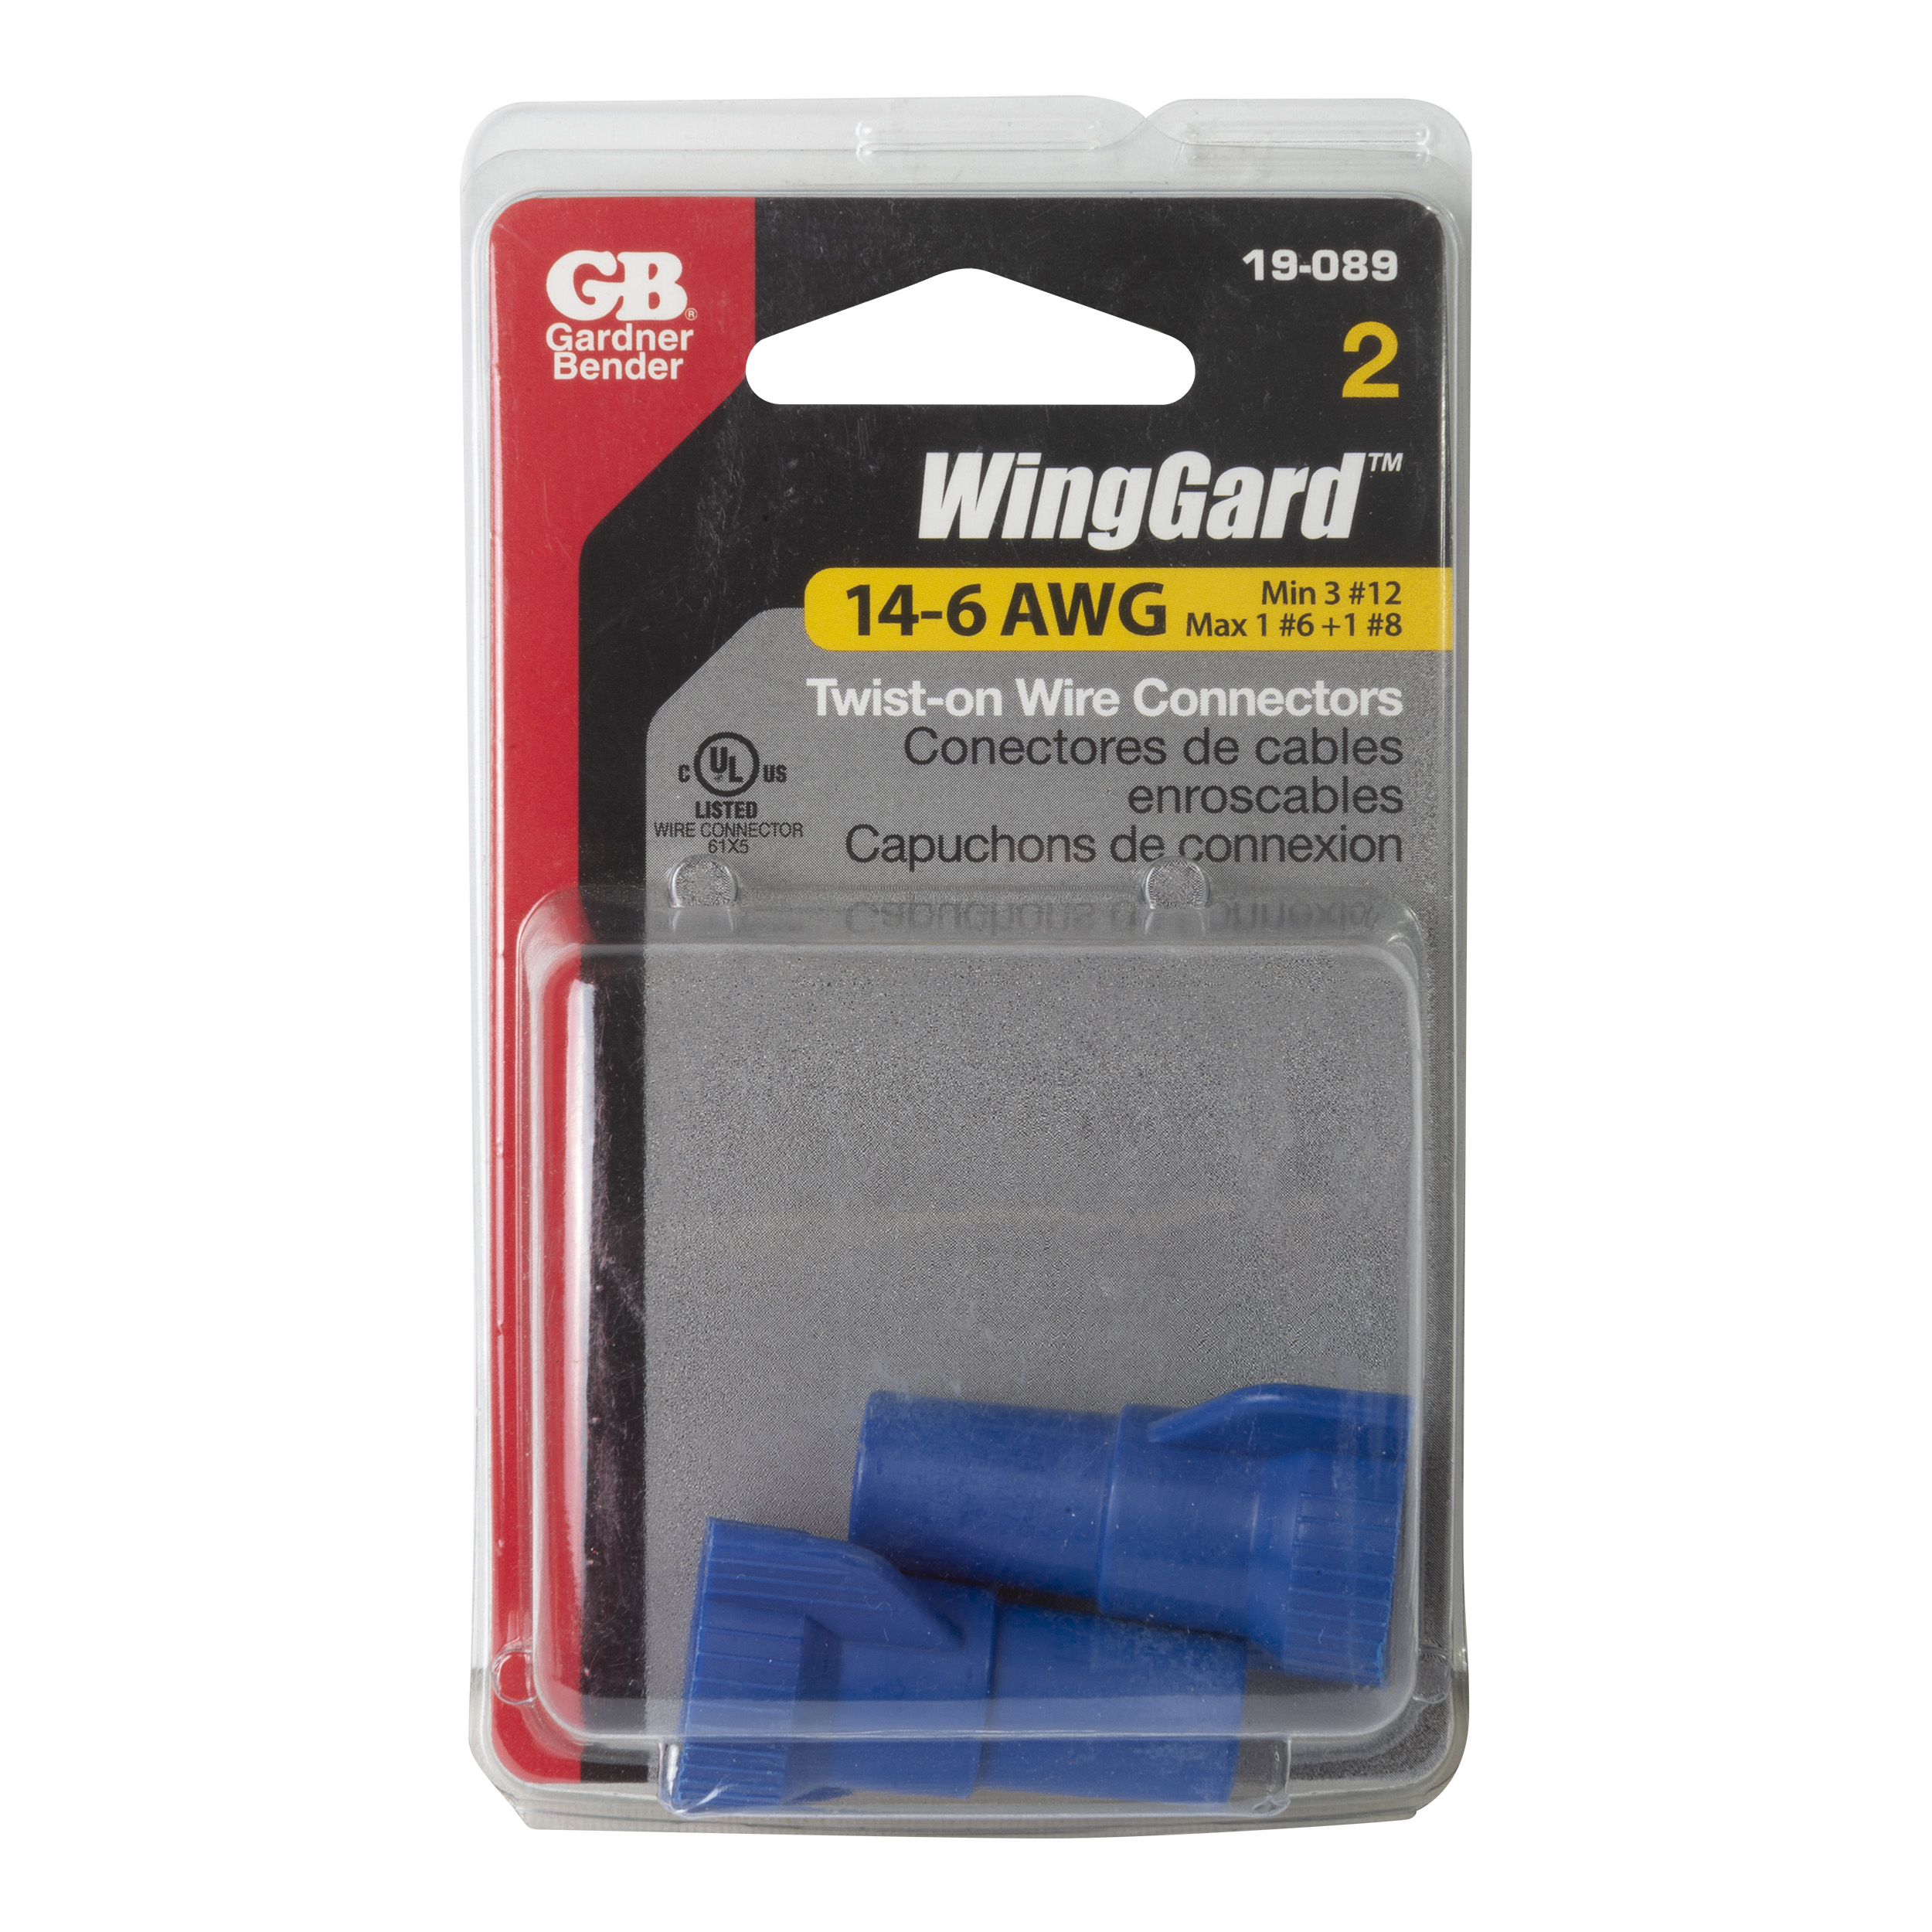 WingGard ULTRA, High-Leverage, Easy-on, Wing-type, Twist-on Wire 